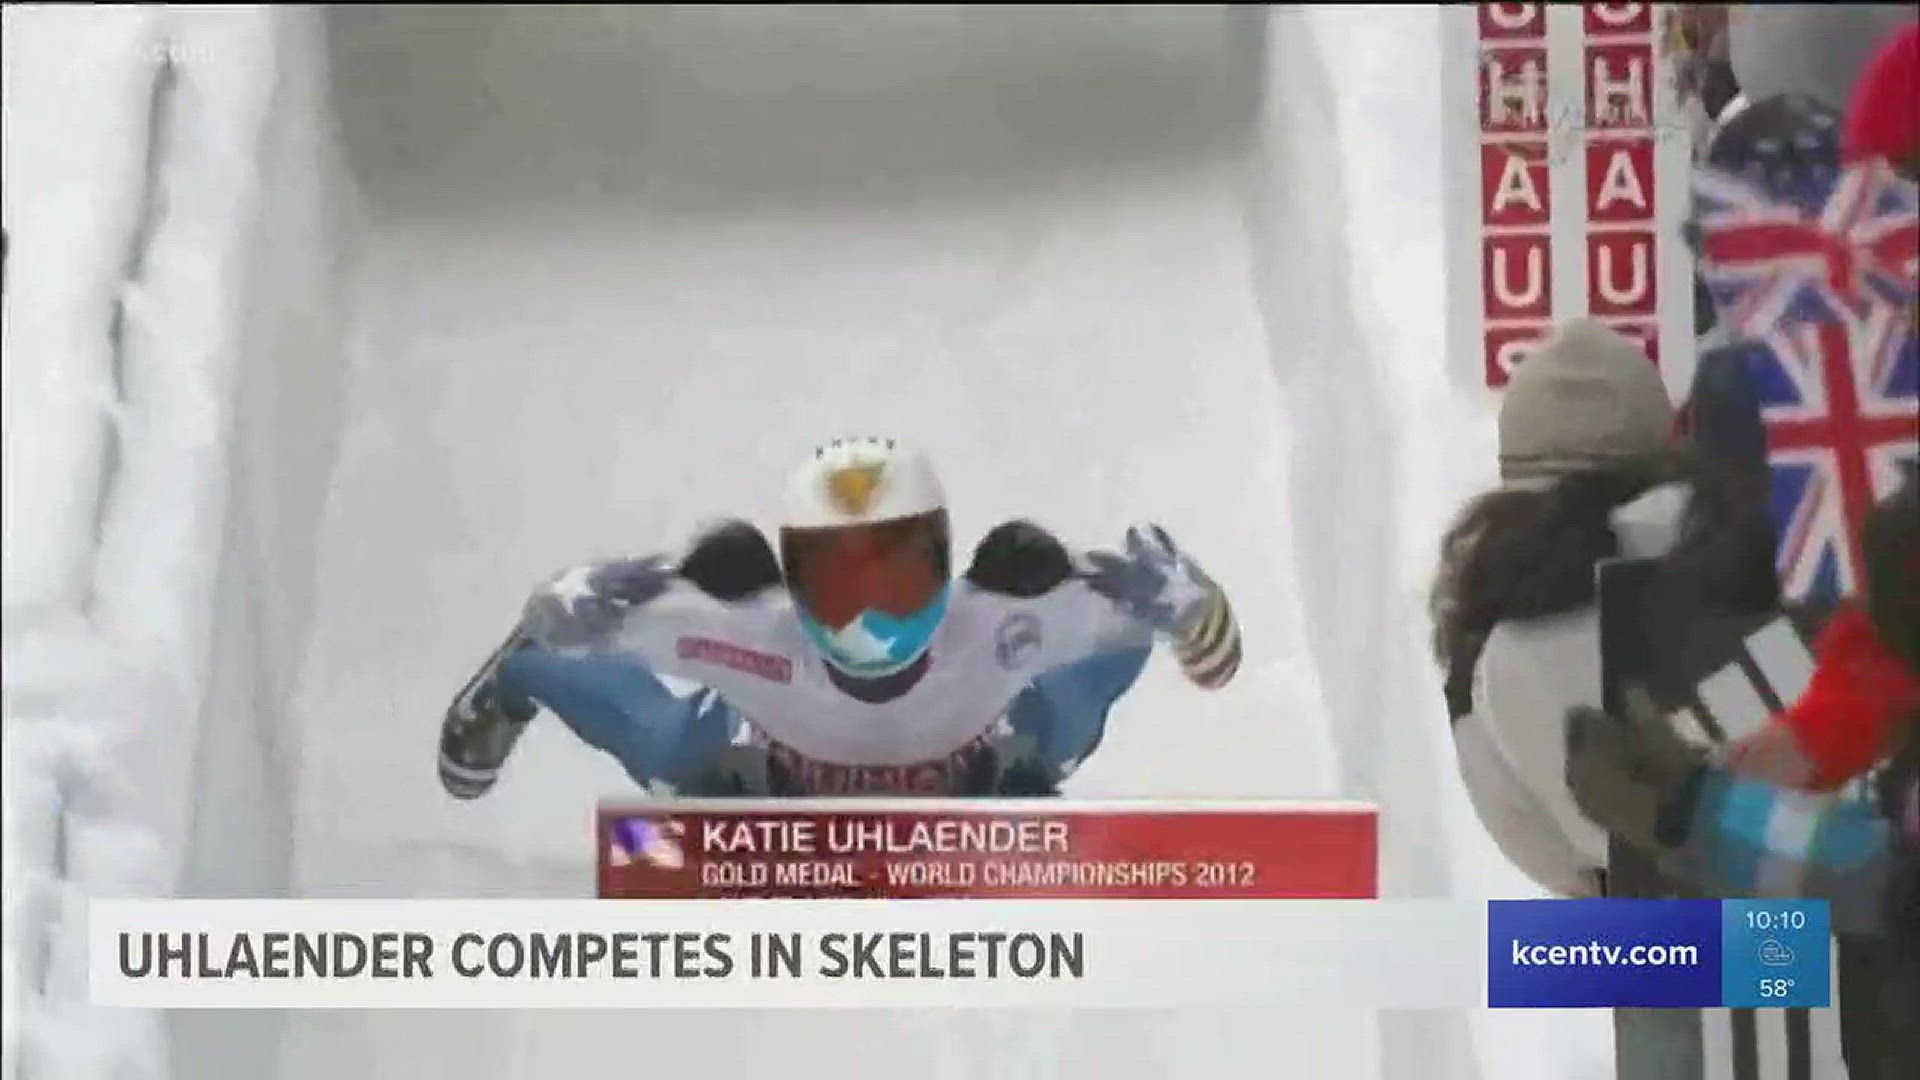 Katie Uhlaender is competing in her fourth Olympic Games